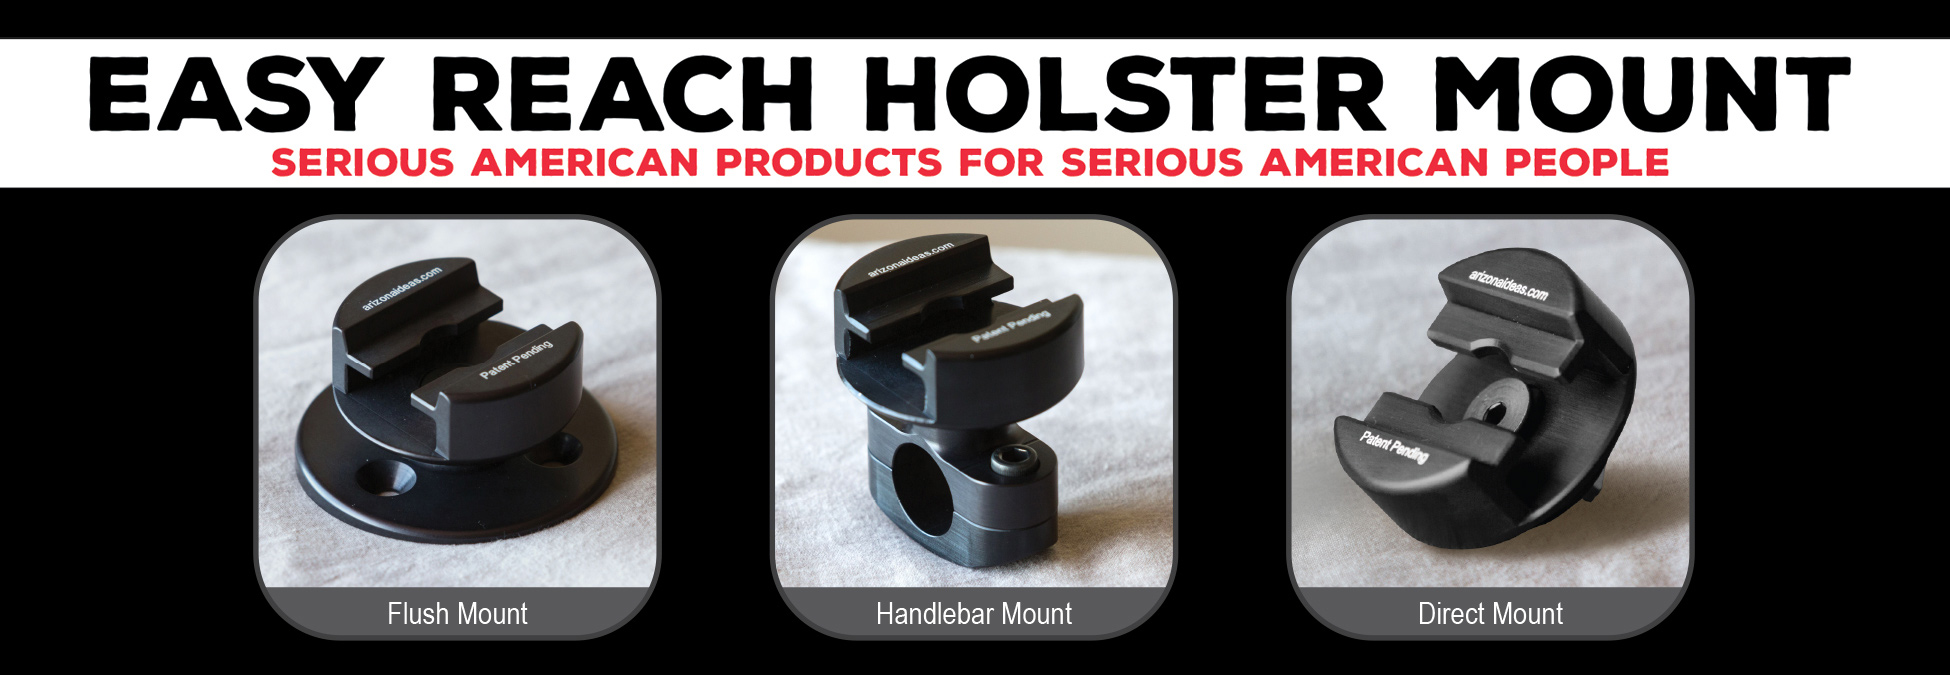 Easy Reach Holster Mount American Products